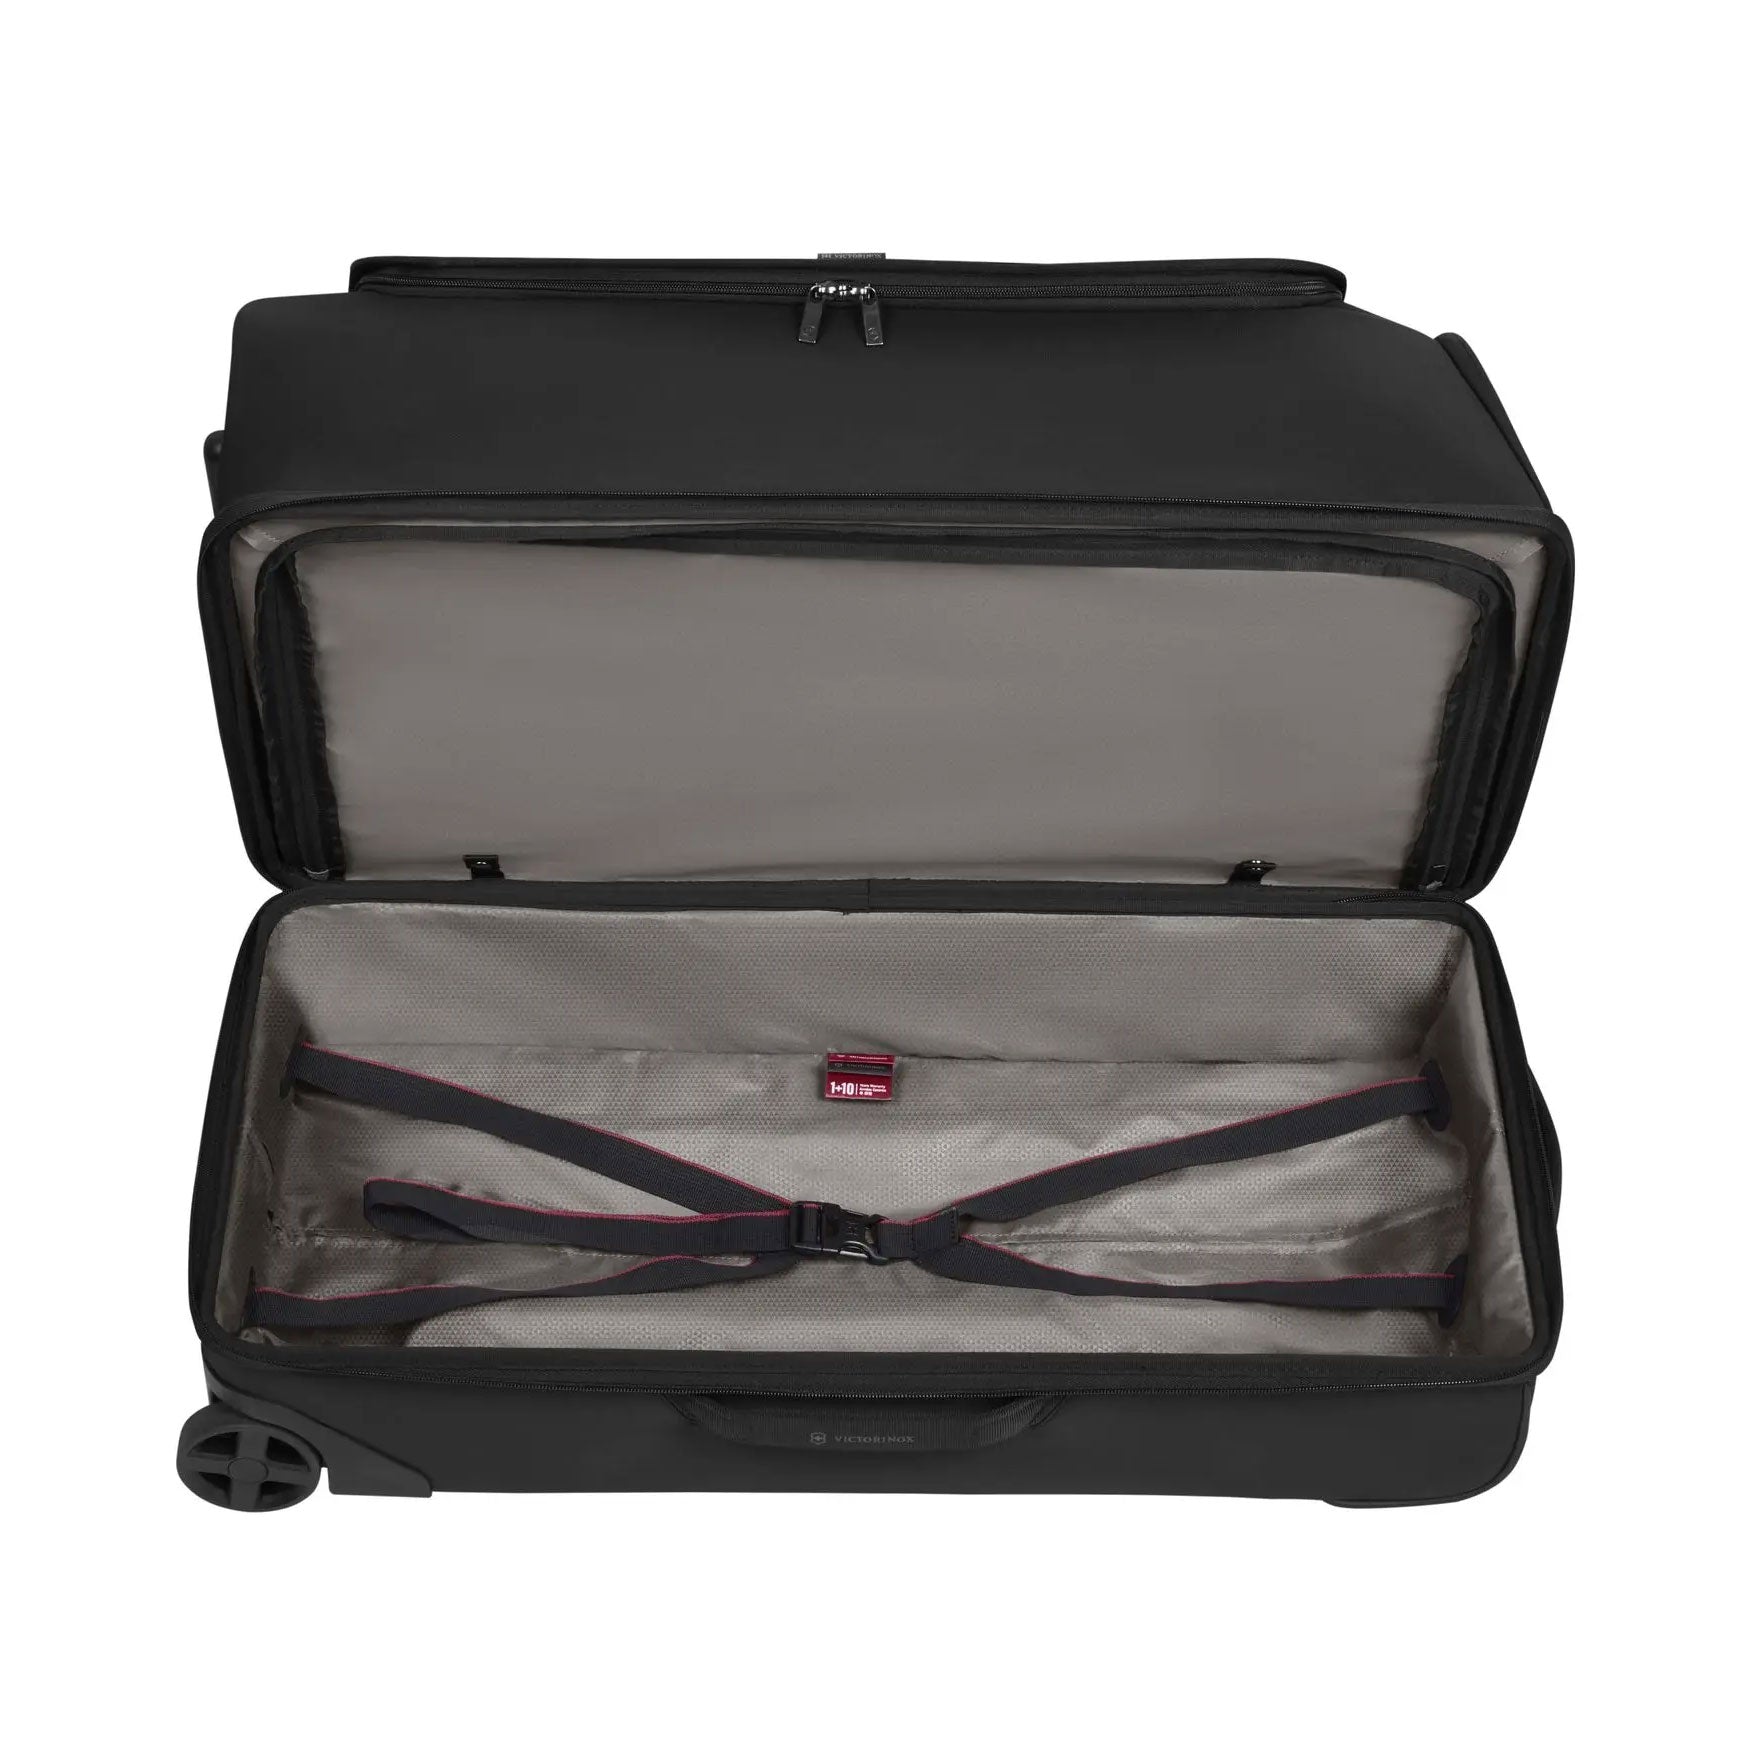 Victorinox Swiss Army® 'Lexicon' Dual Caster Wheeled Garment Bag, Nordstrom